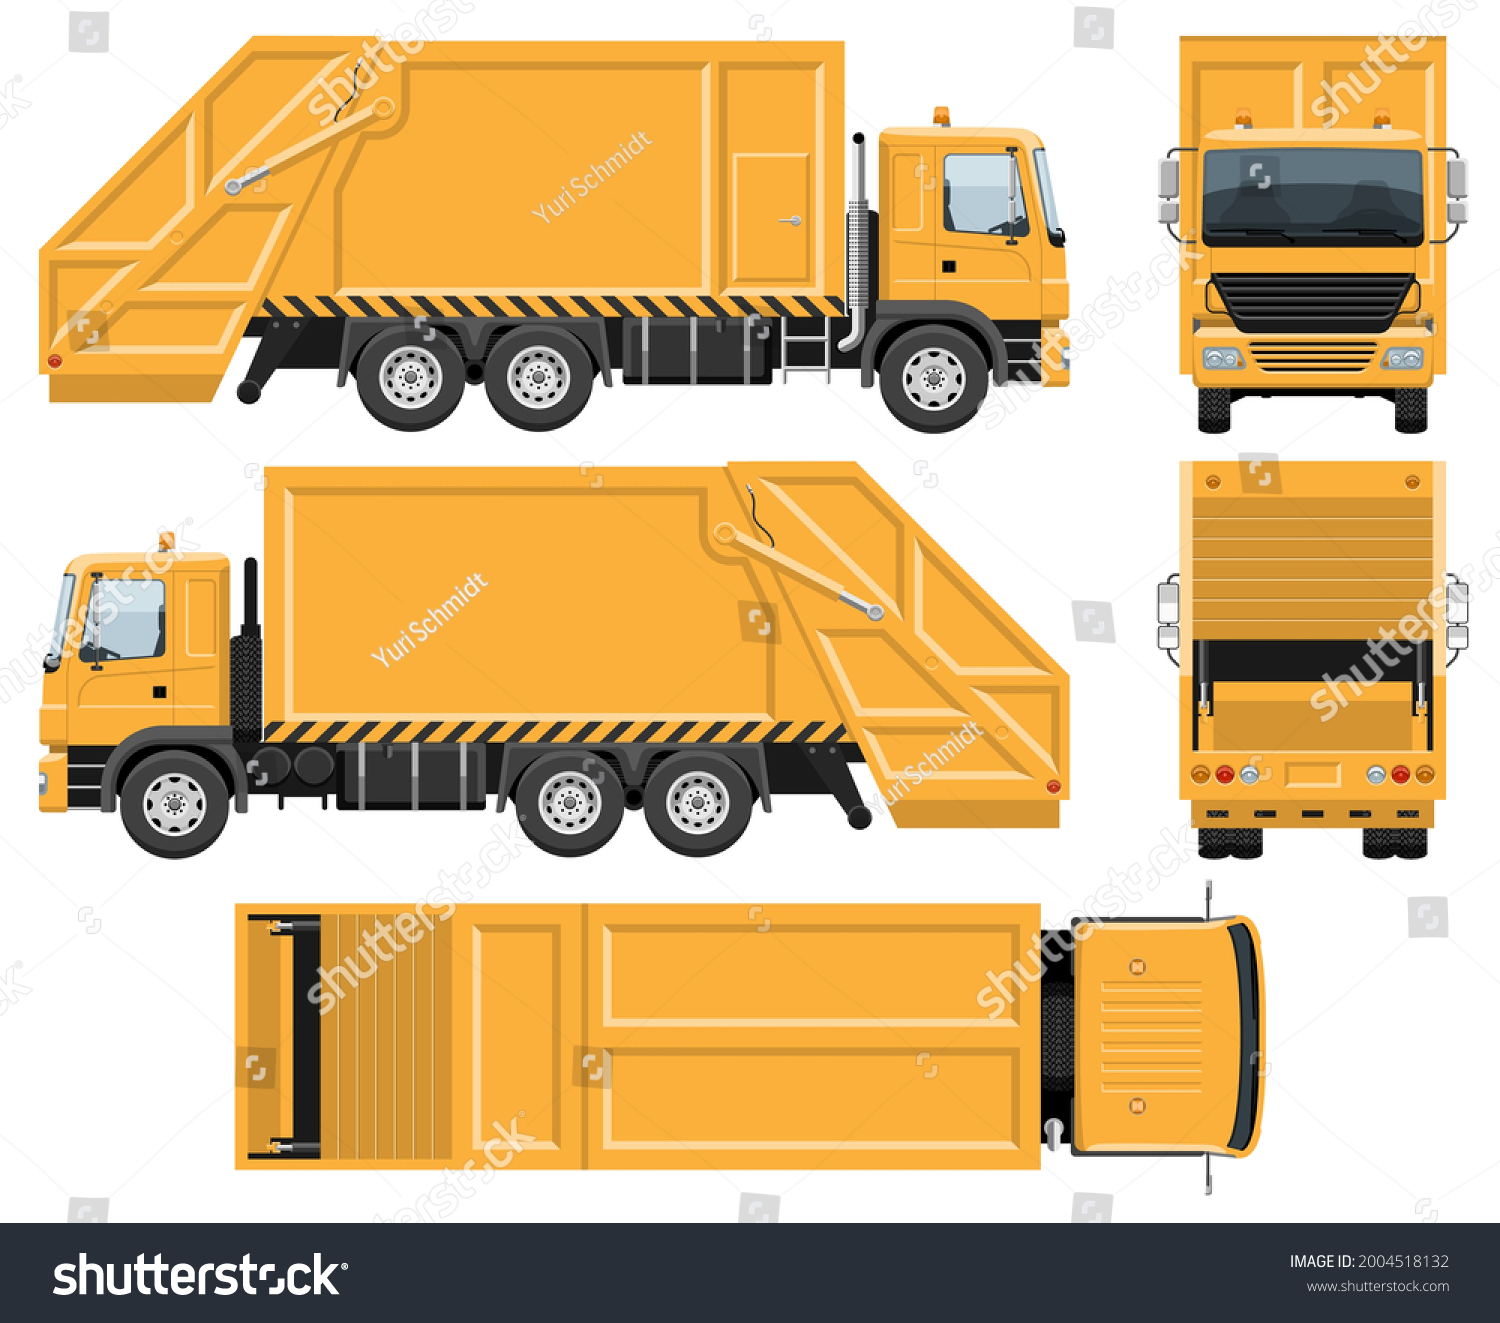 SVG of Garbage truck vector template with simple colors without gradients and effects. View from side, front, back, and top svg